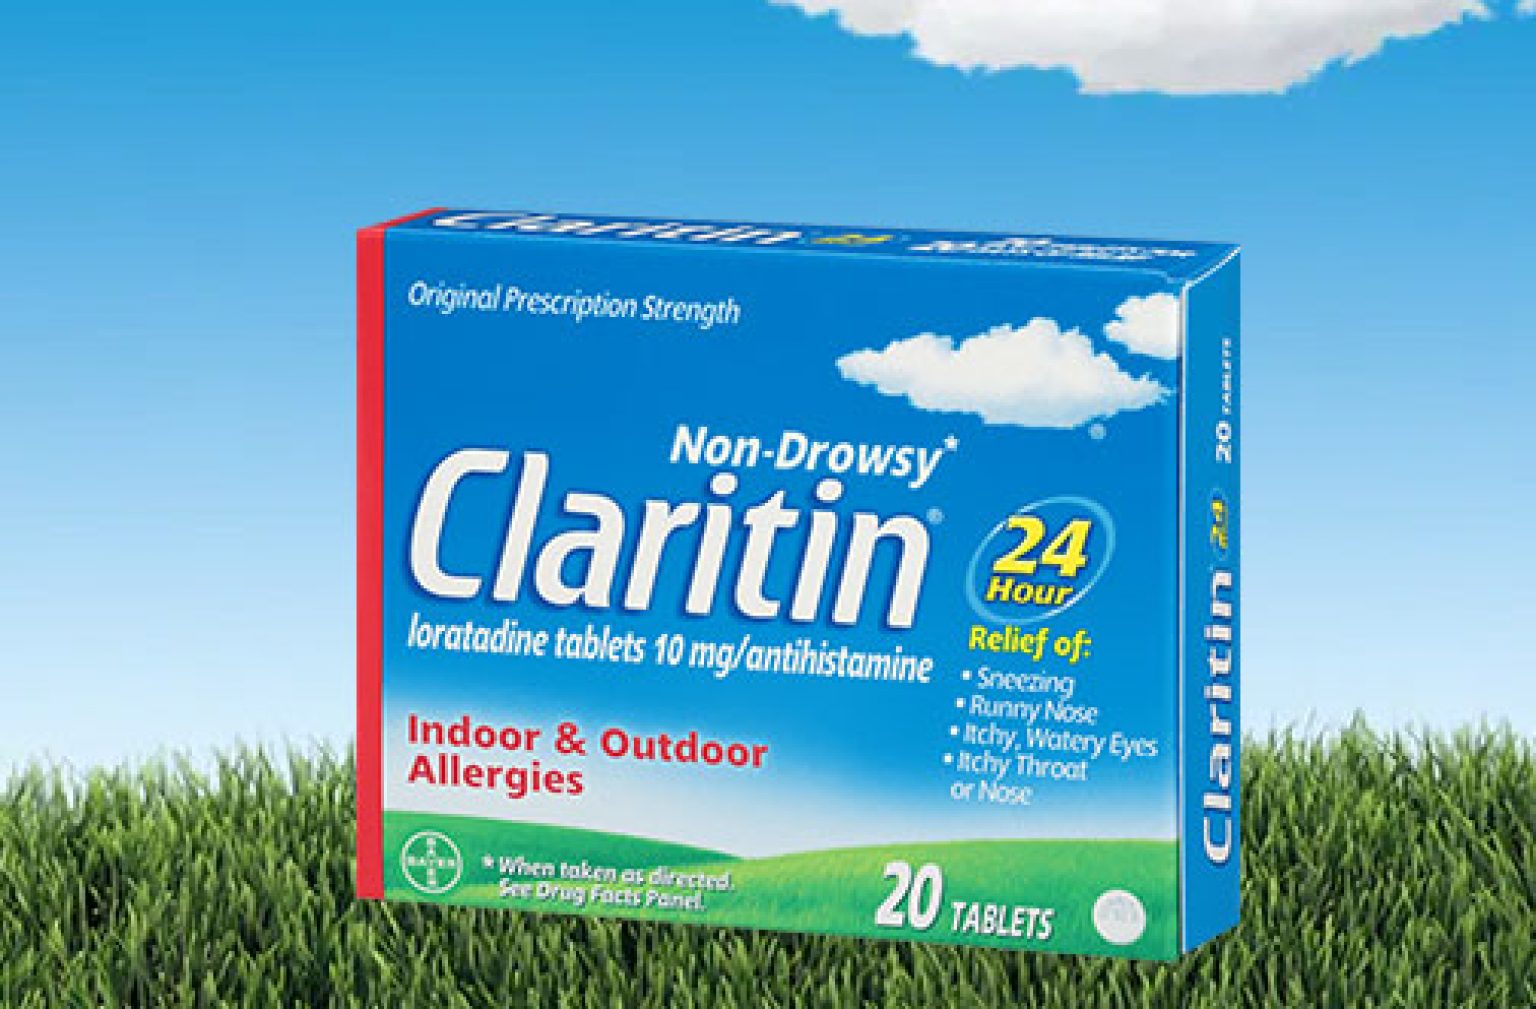 Claritin Coupon Canada Deals from SaveaLoonie